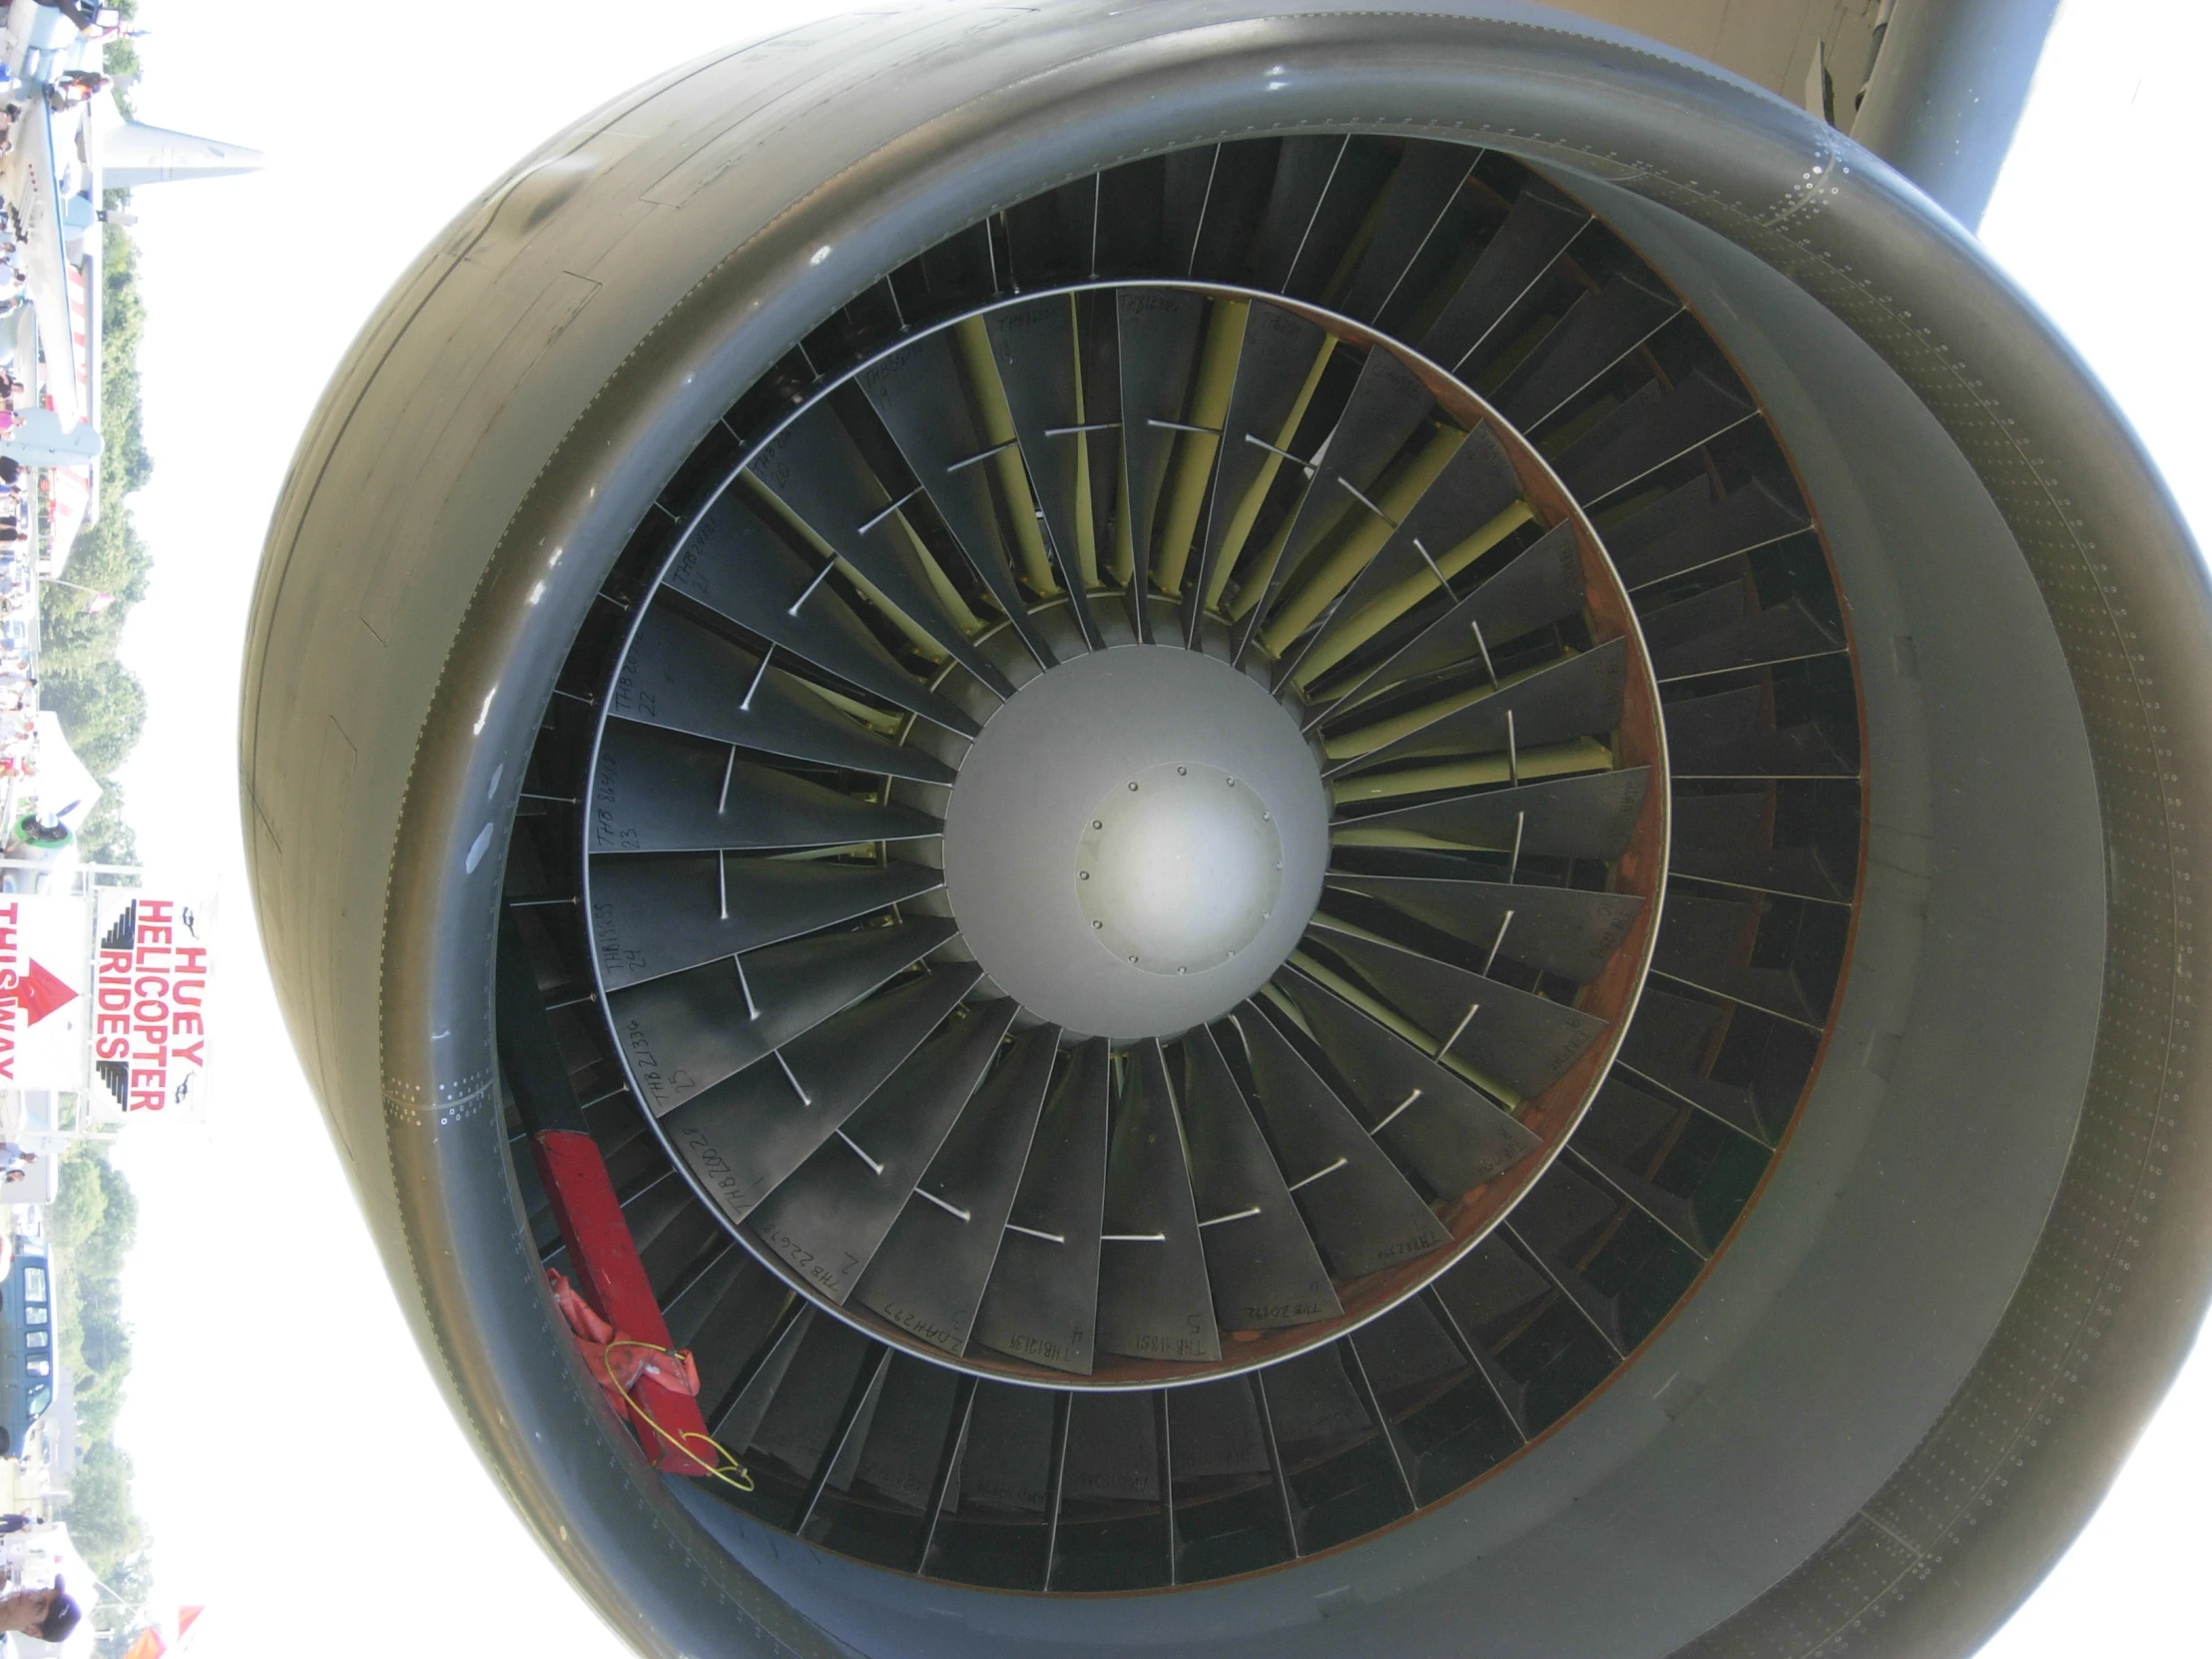 the underside of an airplane's engine with people in the background